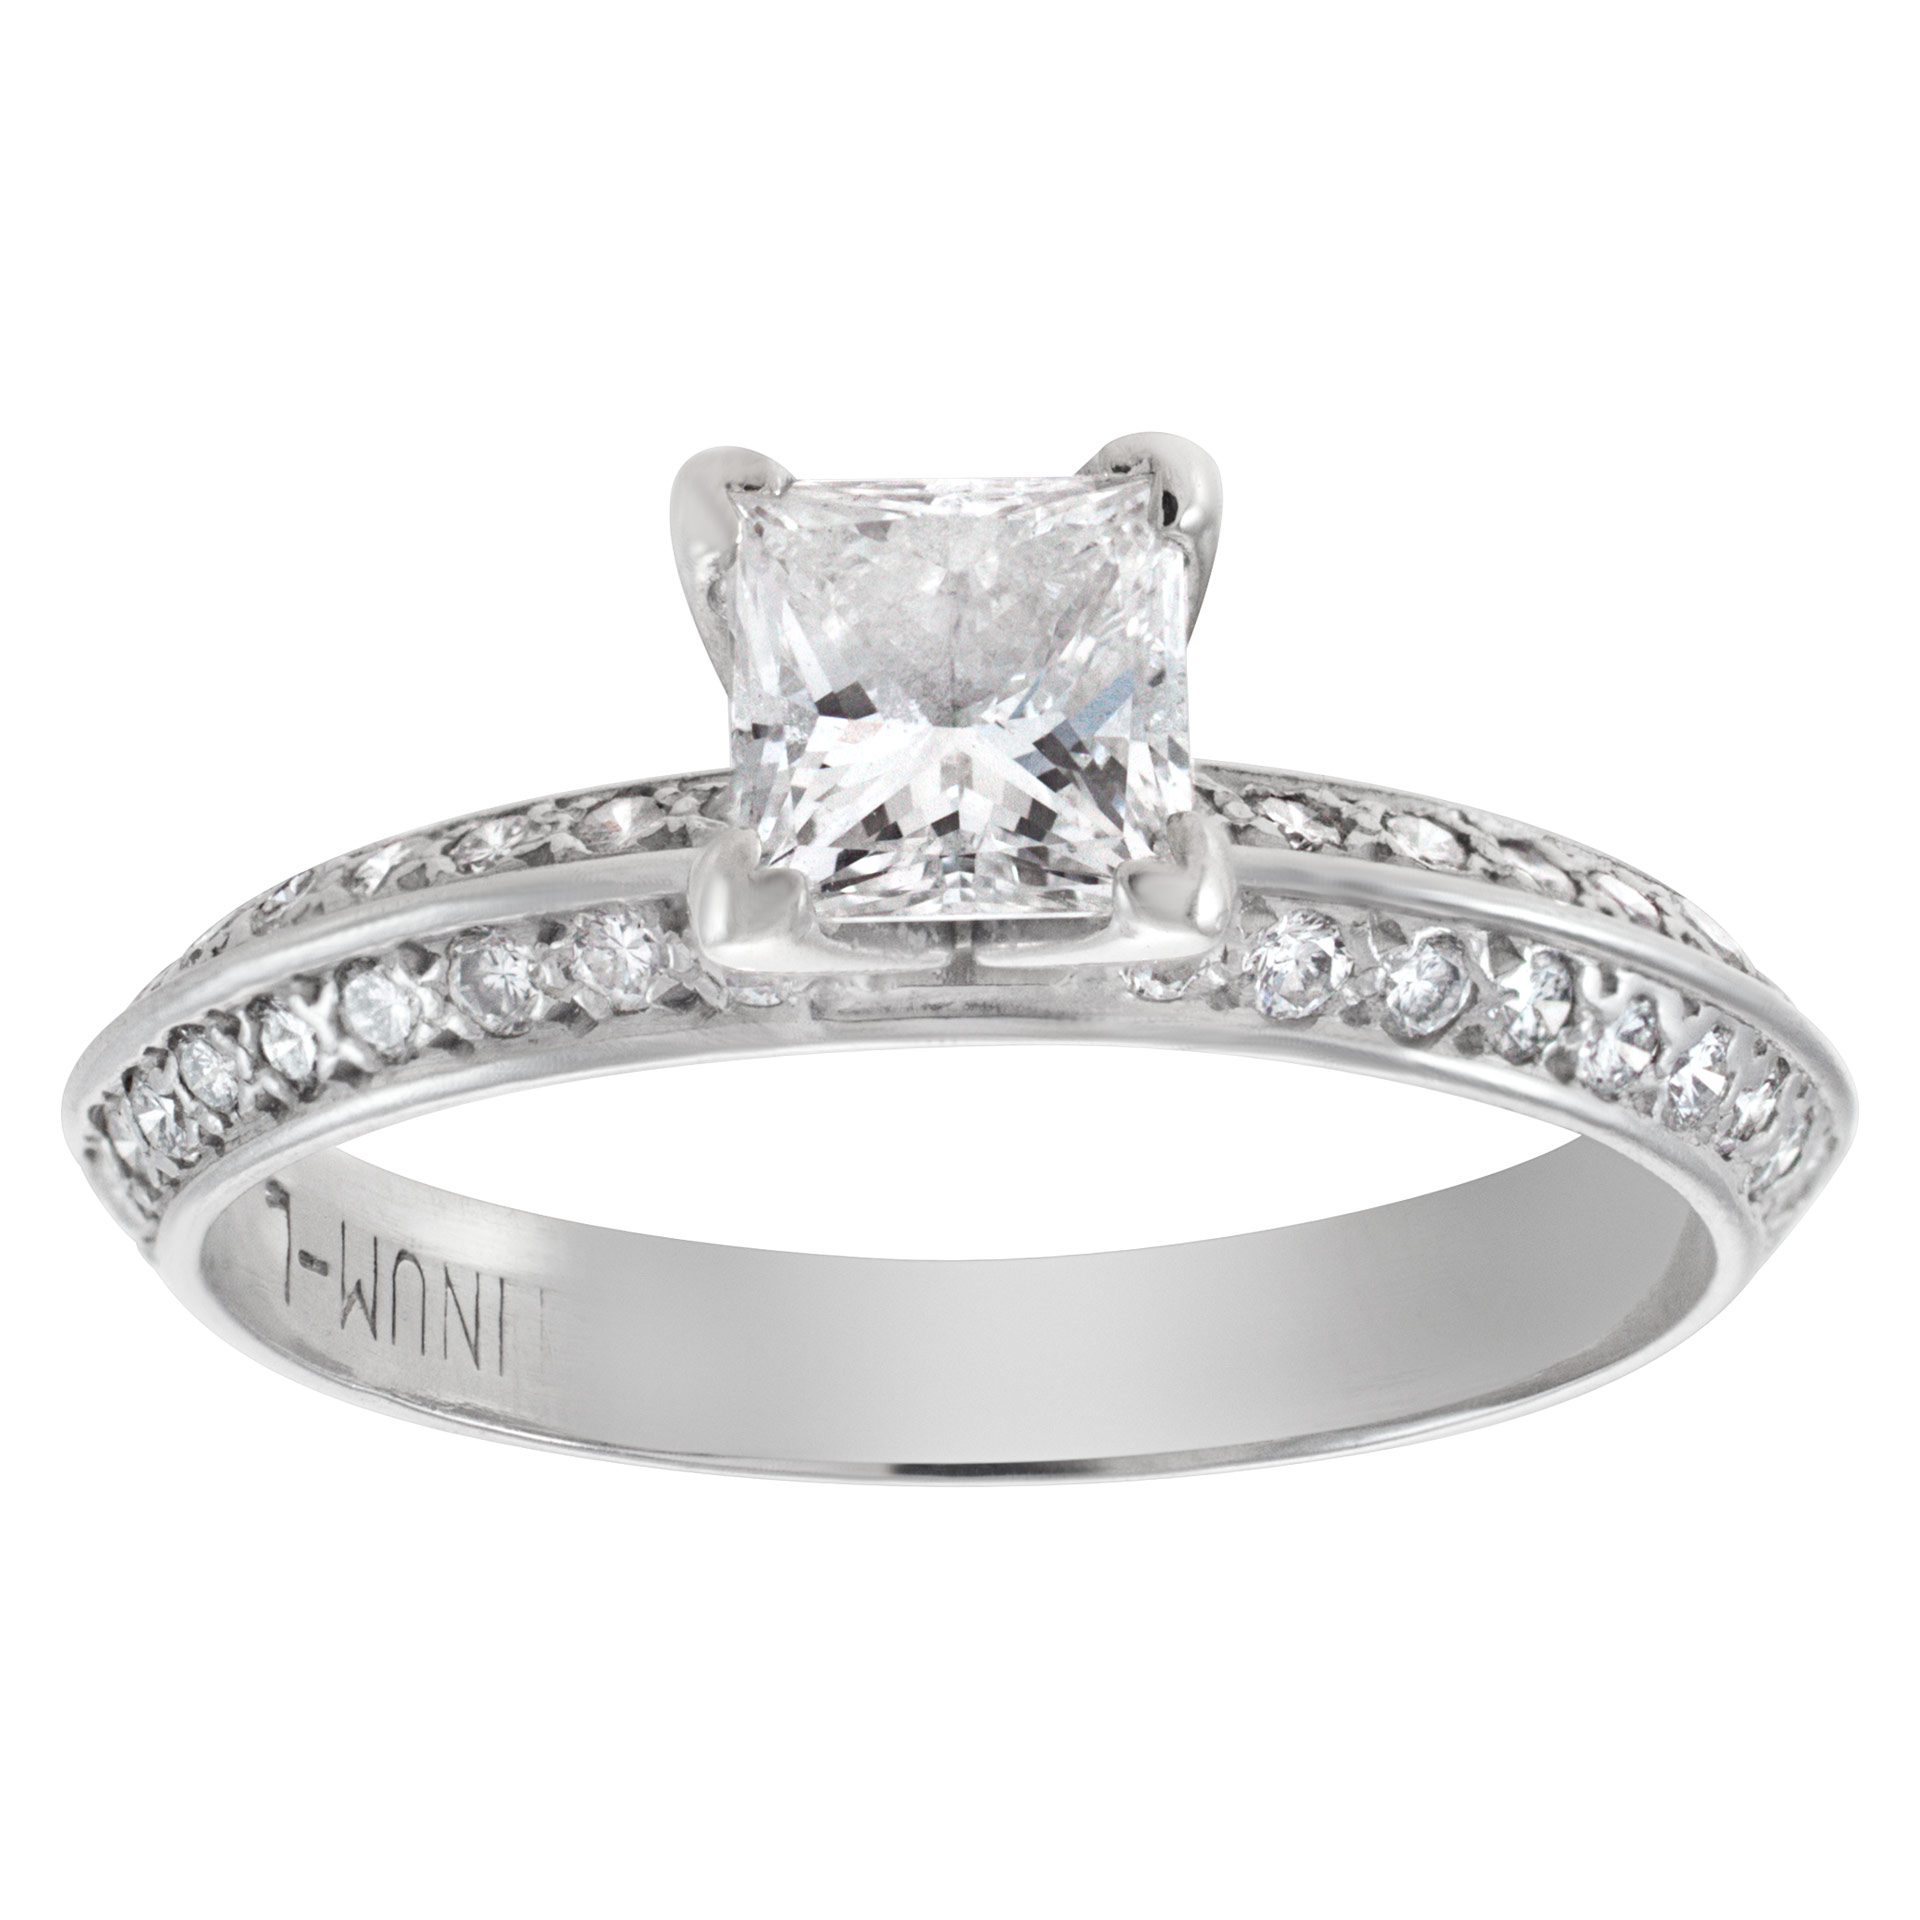 Princess cut diamond engagement ring in platinum, approx. 0.50 ct image 1